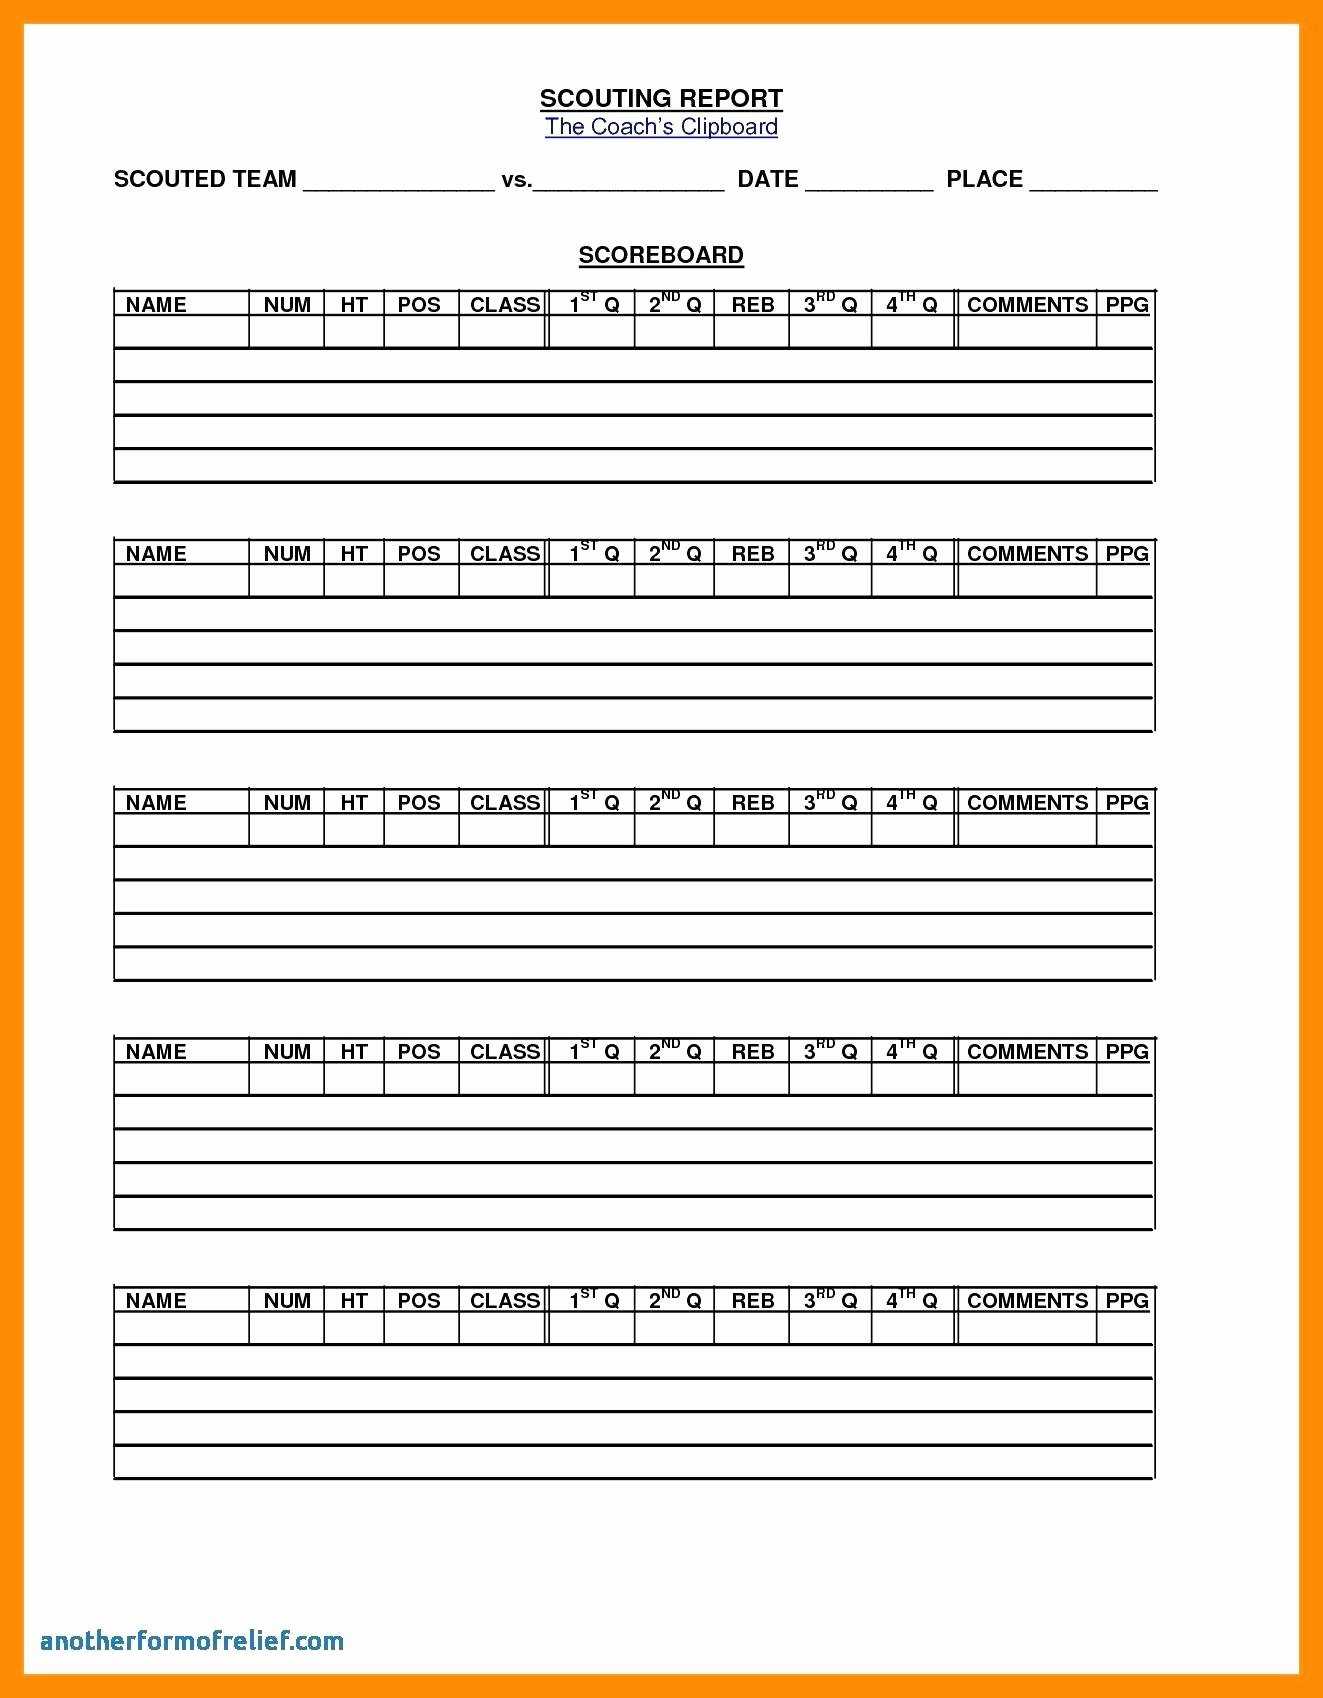 2E6D Basketball Scouting Report Template Sheets In Basketball Scouting Report Template